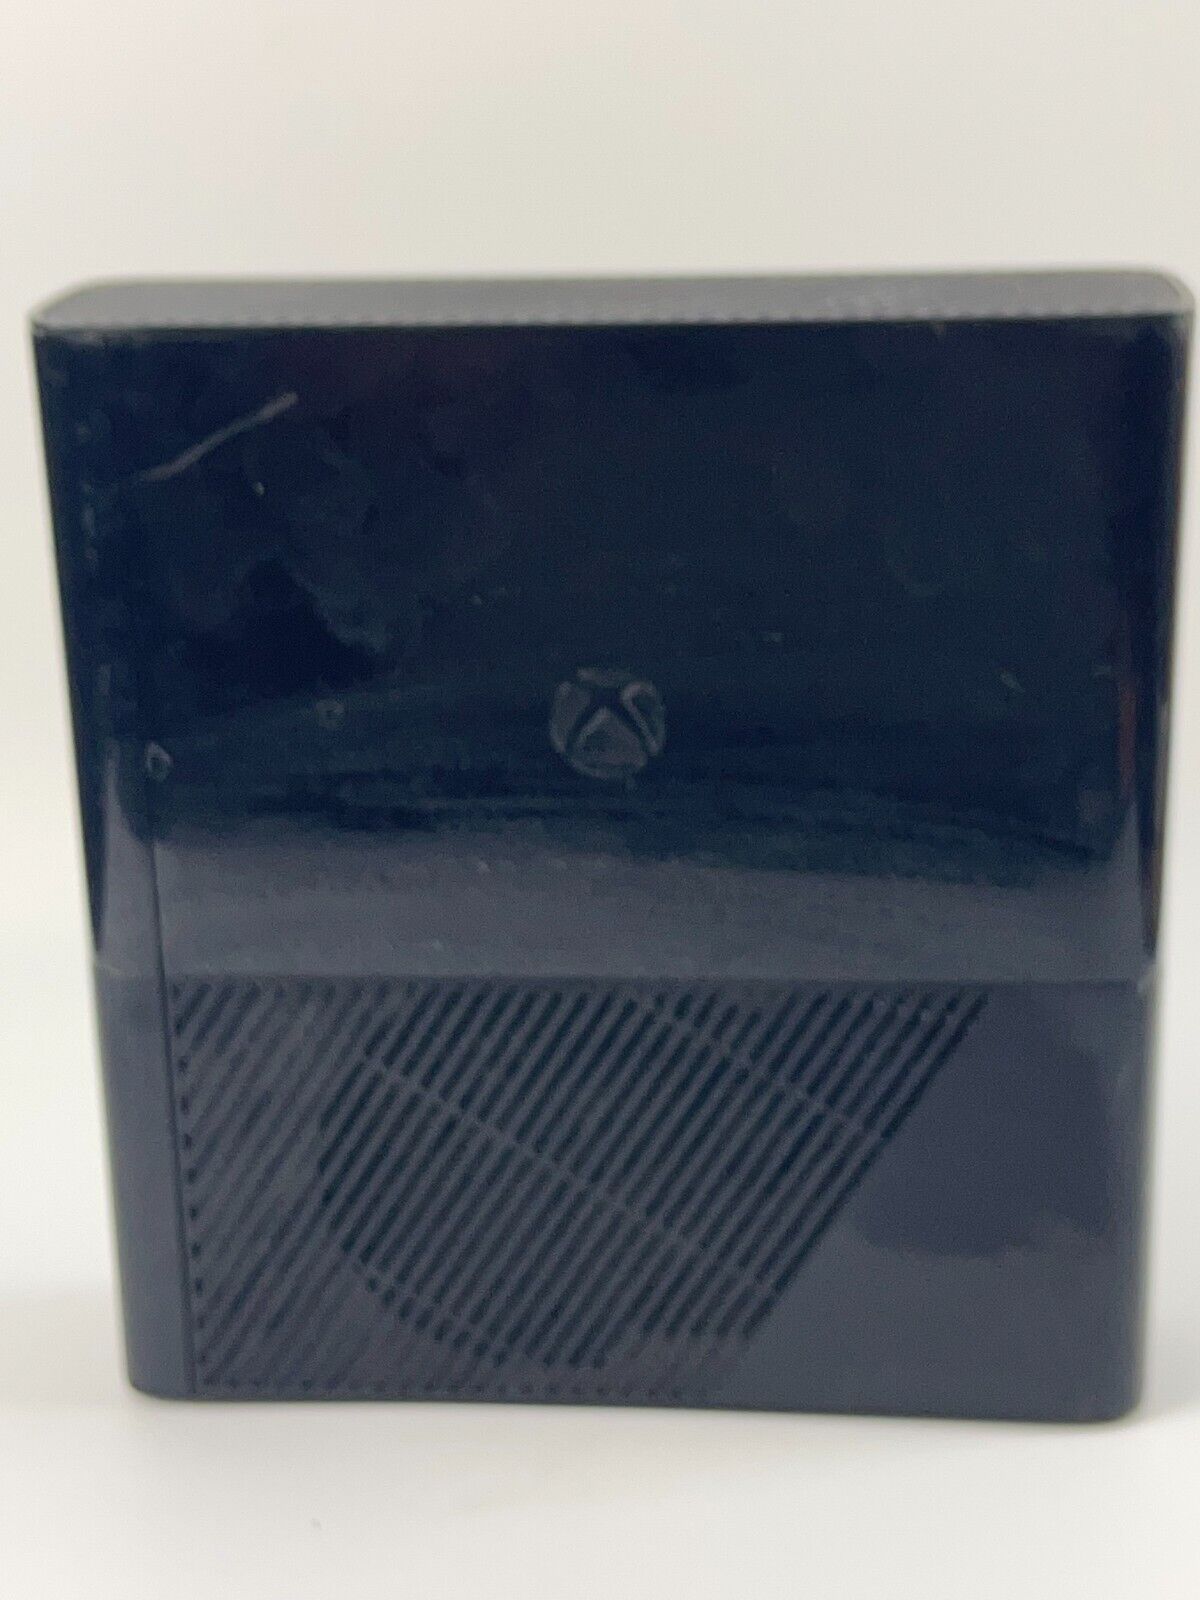 Xbox 360 E Black Console Only Model #1538 For Parts Red Light